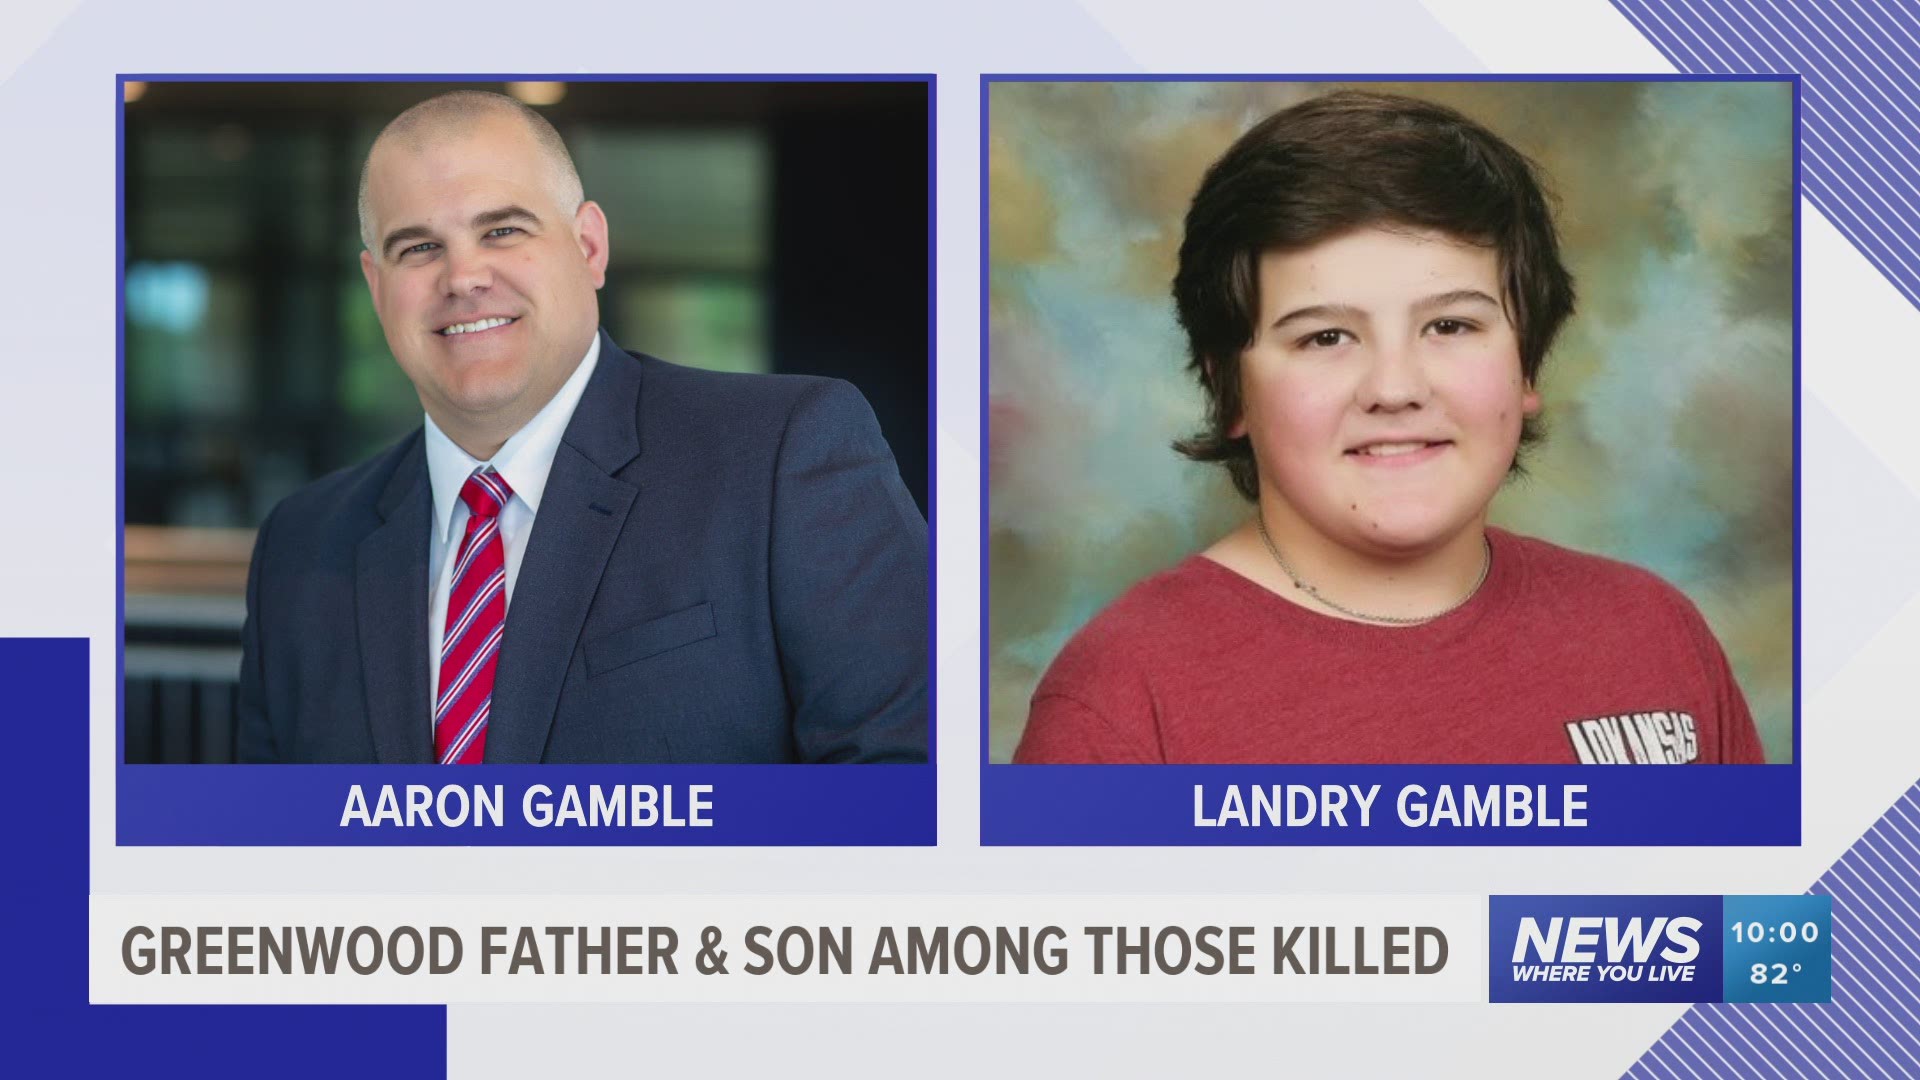 A fatal crash in LeFlore County Friday morning claimed the lives of five Arkansans, including two teens and the principal of Greenwood High School.